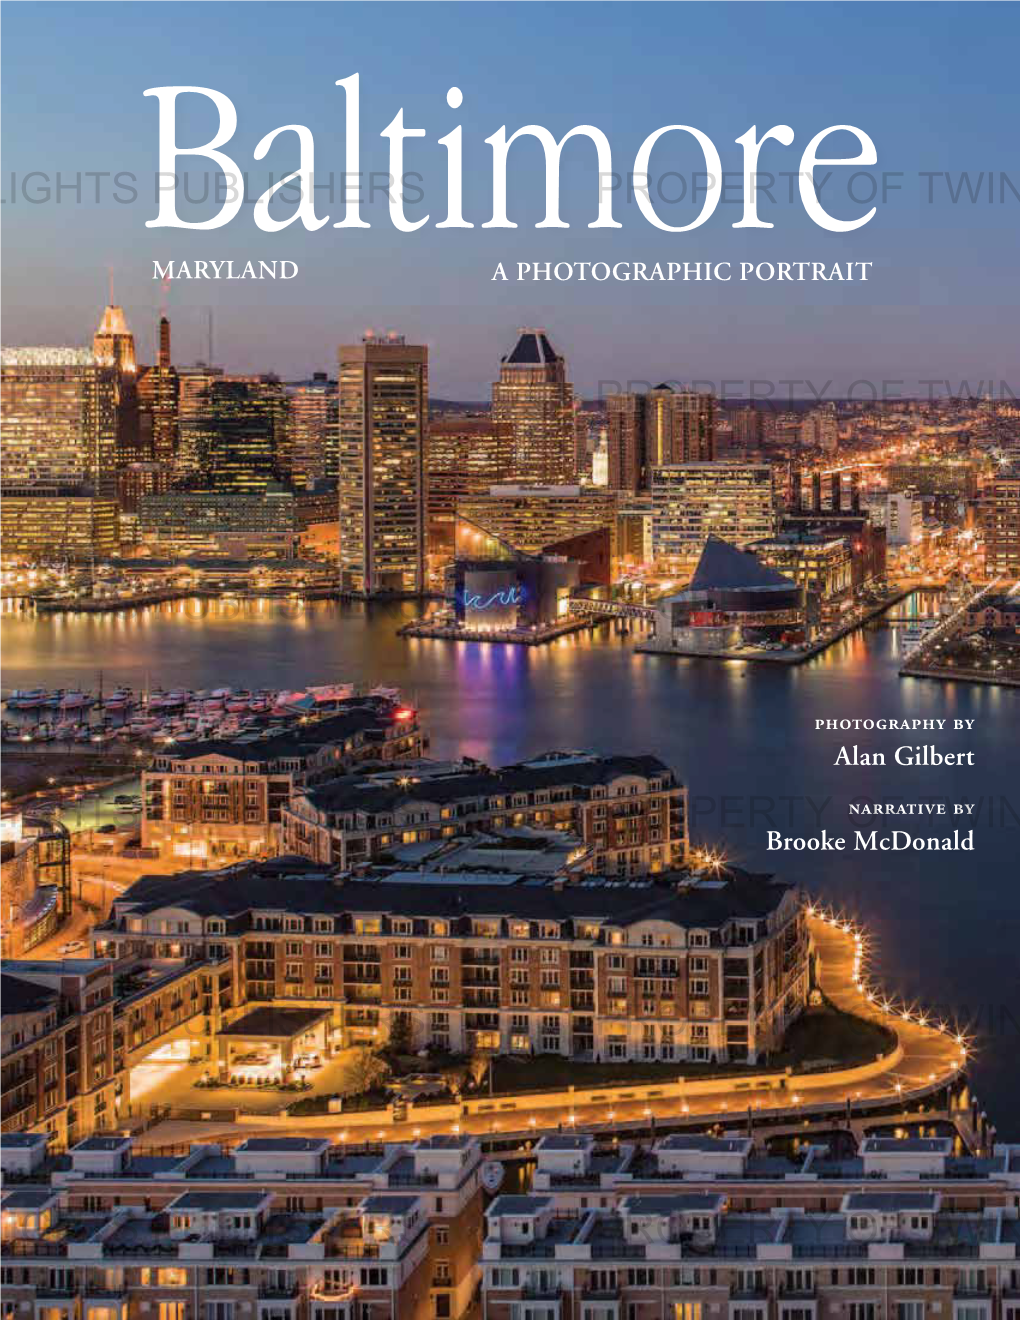 OF TWIN LIGHTS PUBLISHERS PROPERTY of TWIN LIGHTS PUBLISHERS Baltimore Maryland a PHOTOGRAPHIC PORTRAIT